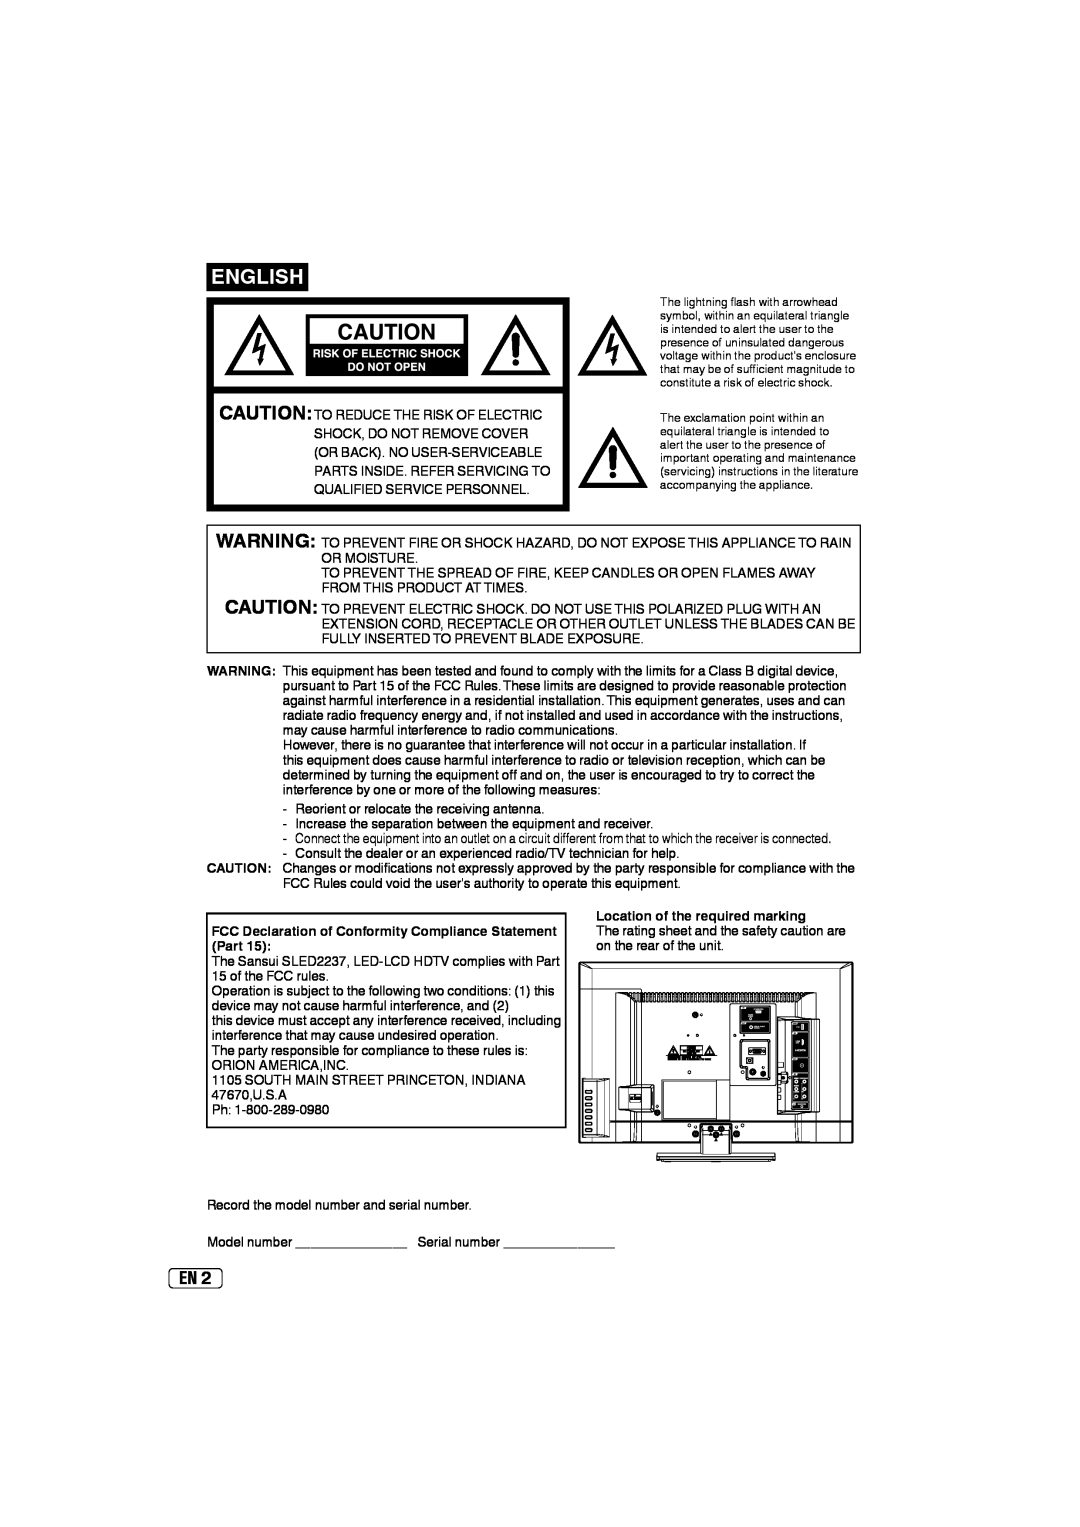 Sansui SLED2237 English, FCC Declaration of Conformity Compliance Statement, Location of the required marking, Part 